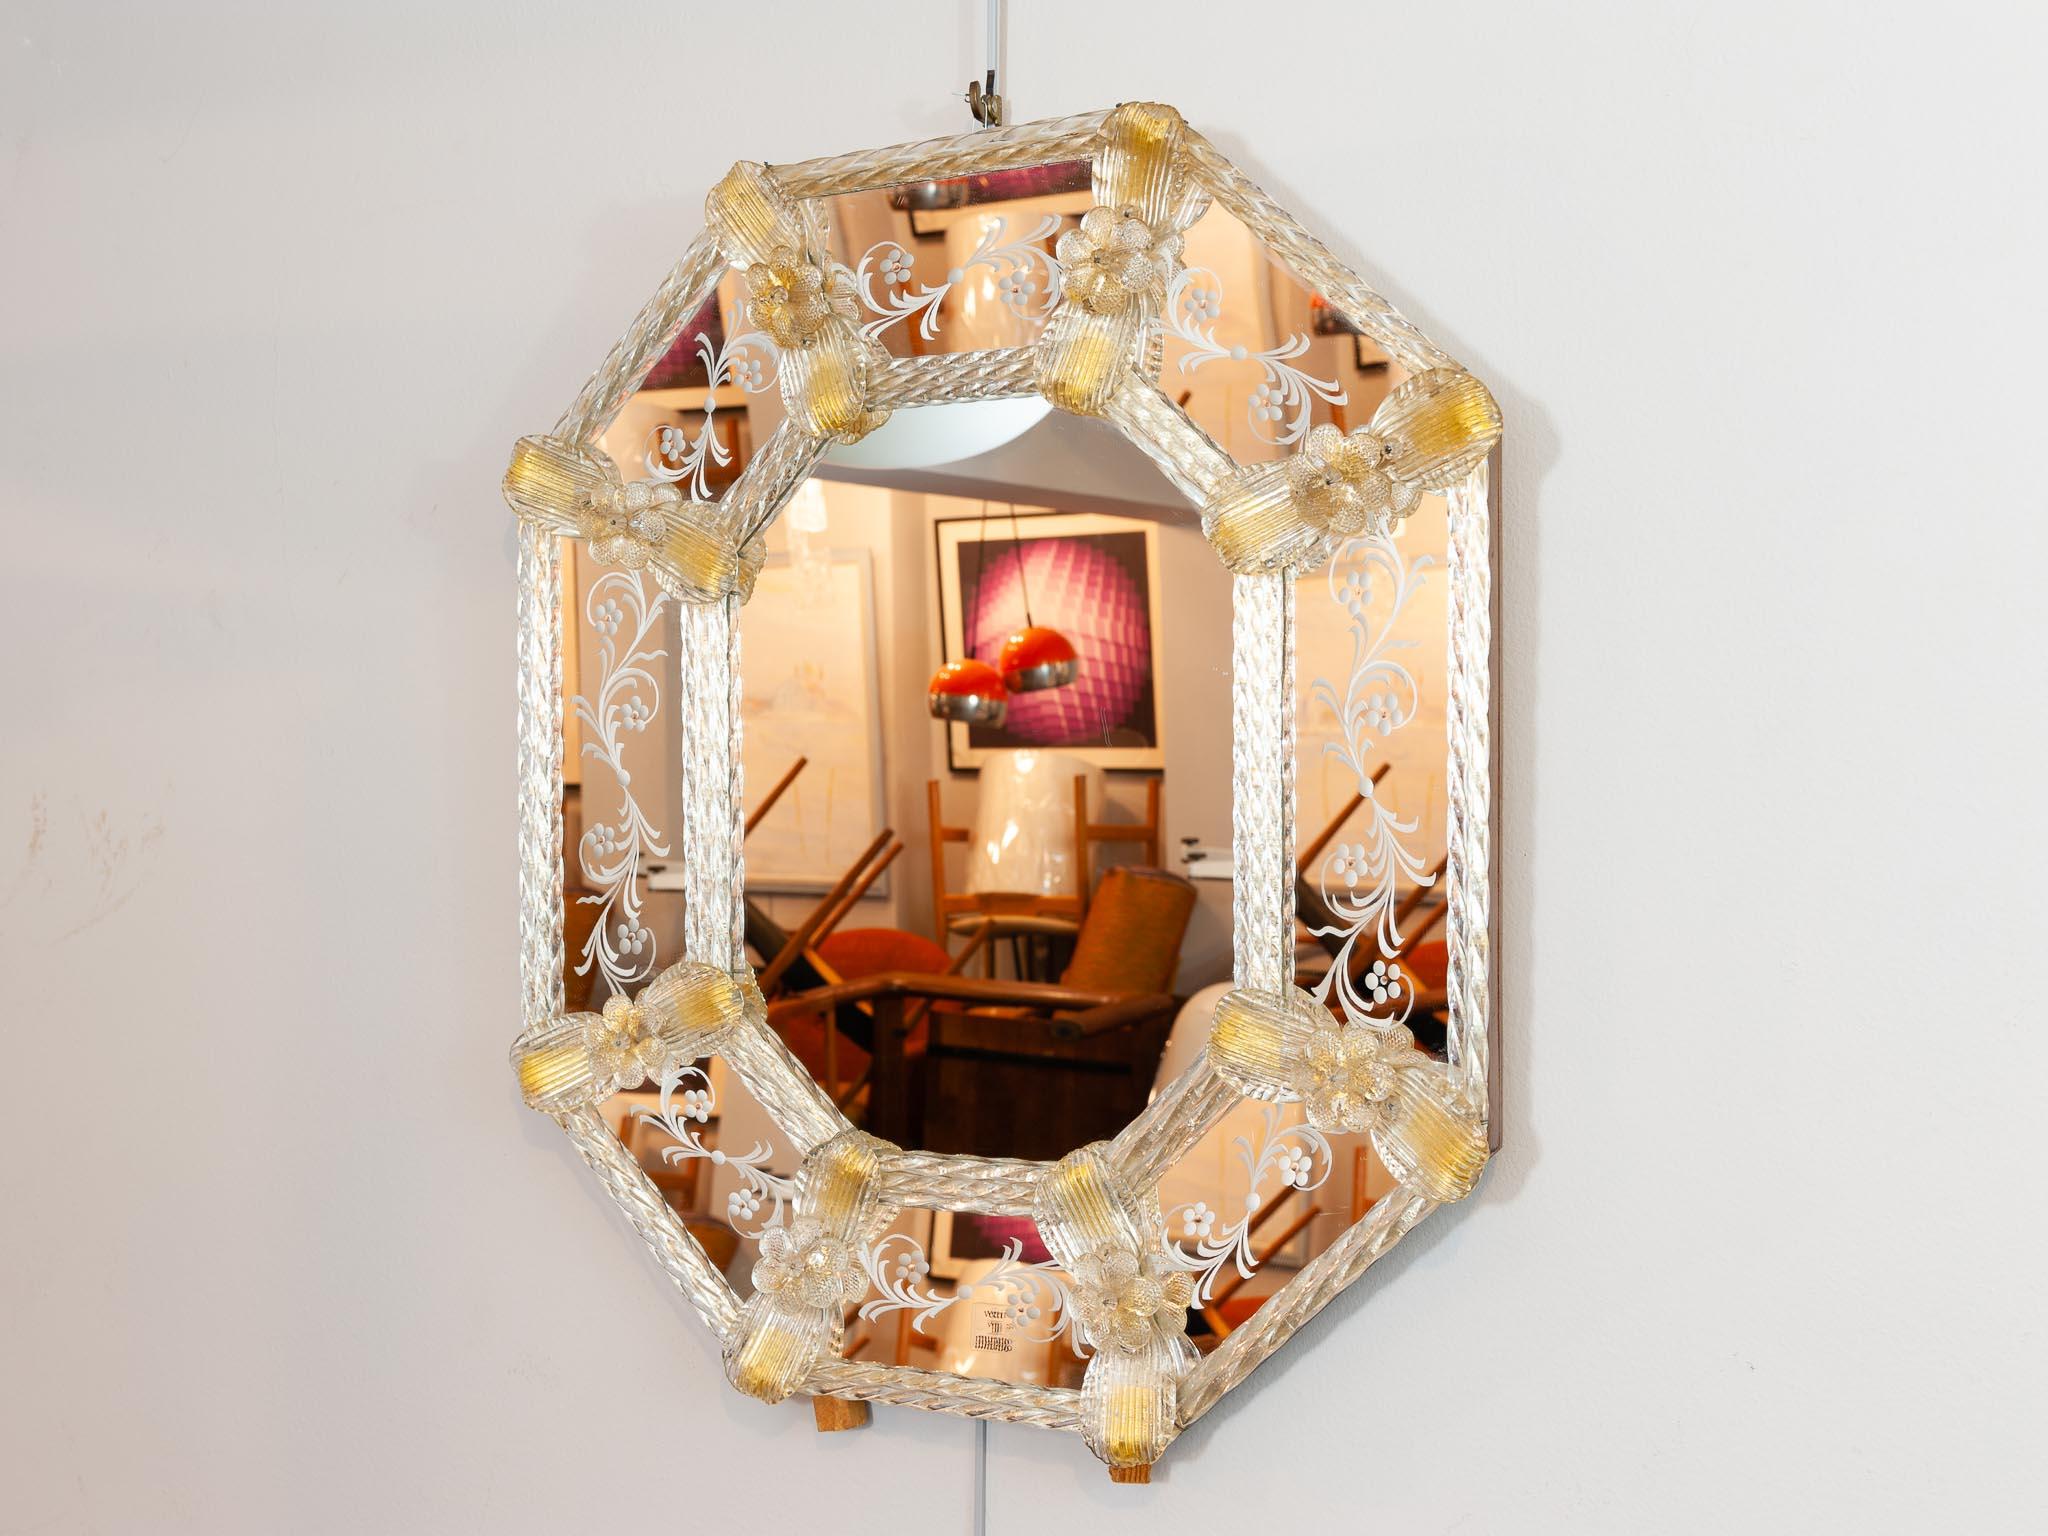 A beautiful 1960s octagonal Italian wall mirror with etching on the surround and floral detailing which hold the glass rods in place at either end of the leaves. The flowers and leaves contain gold-flecks which contrast against the rest of the